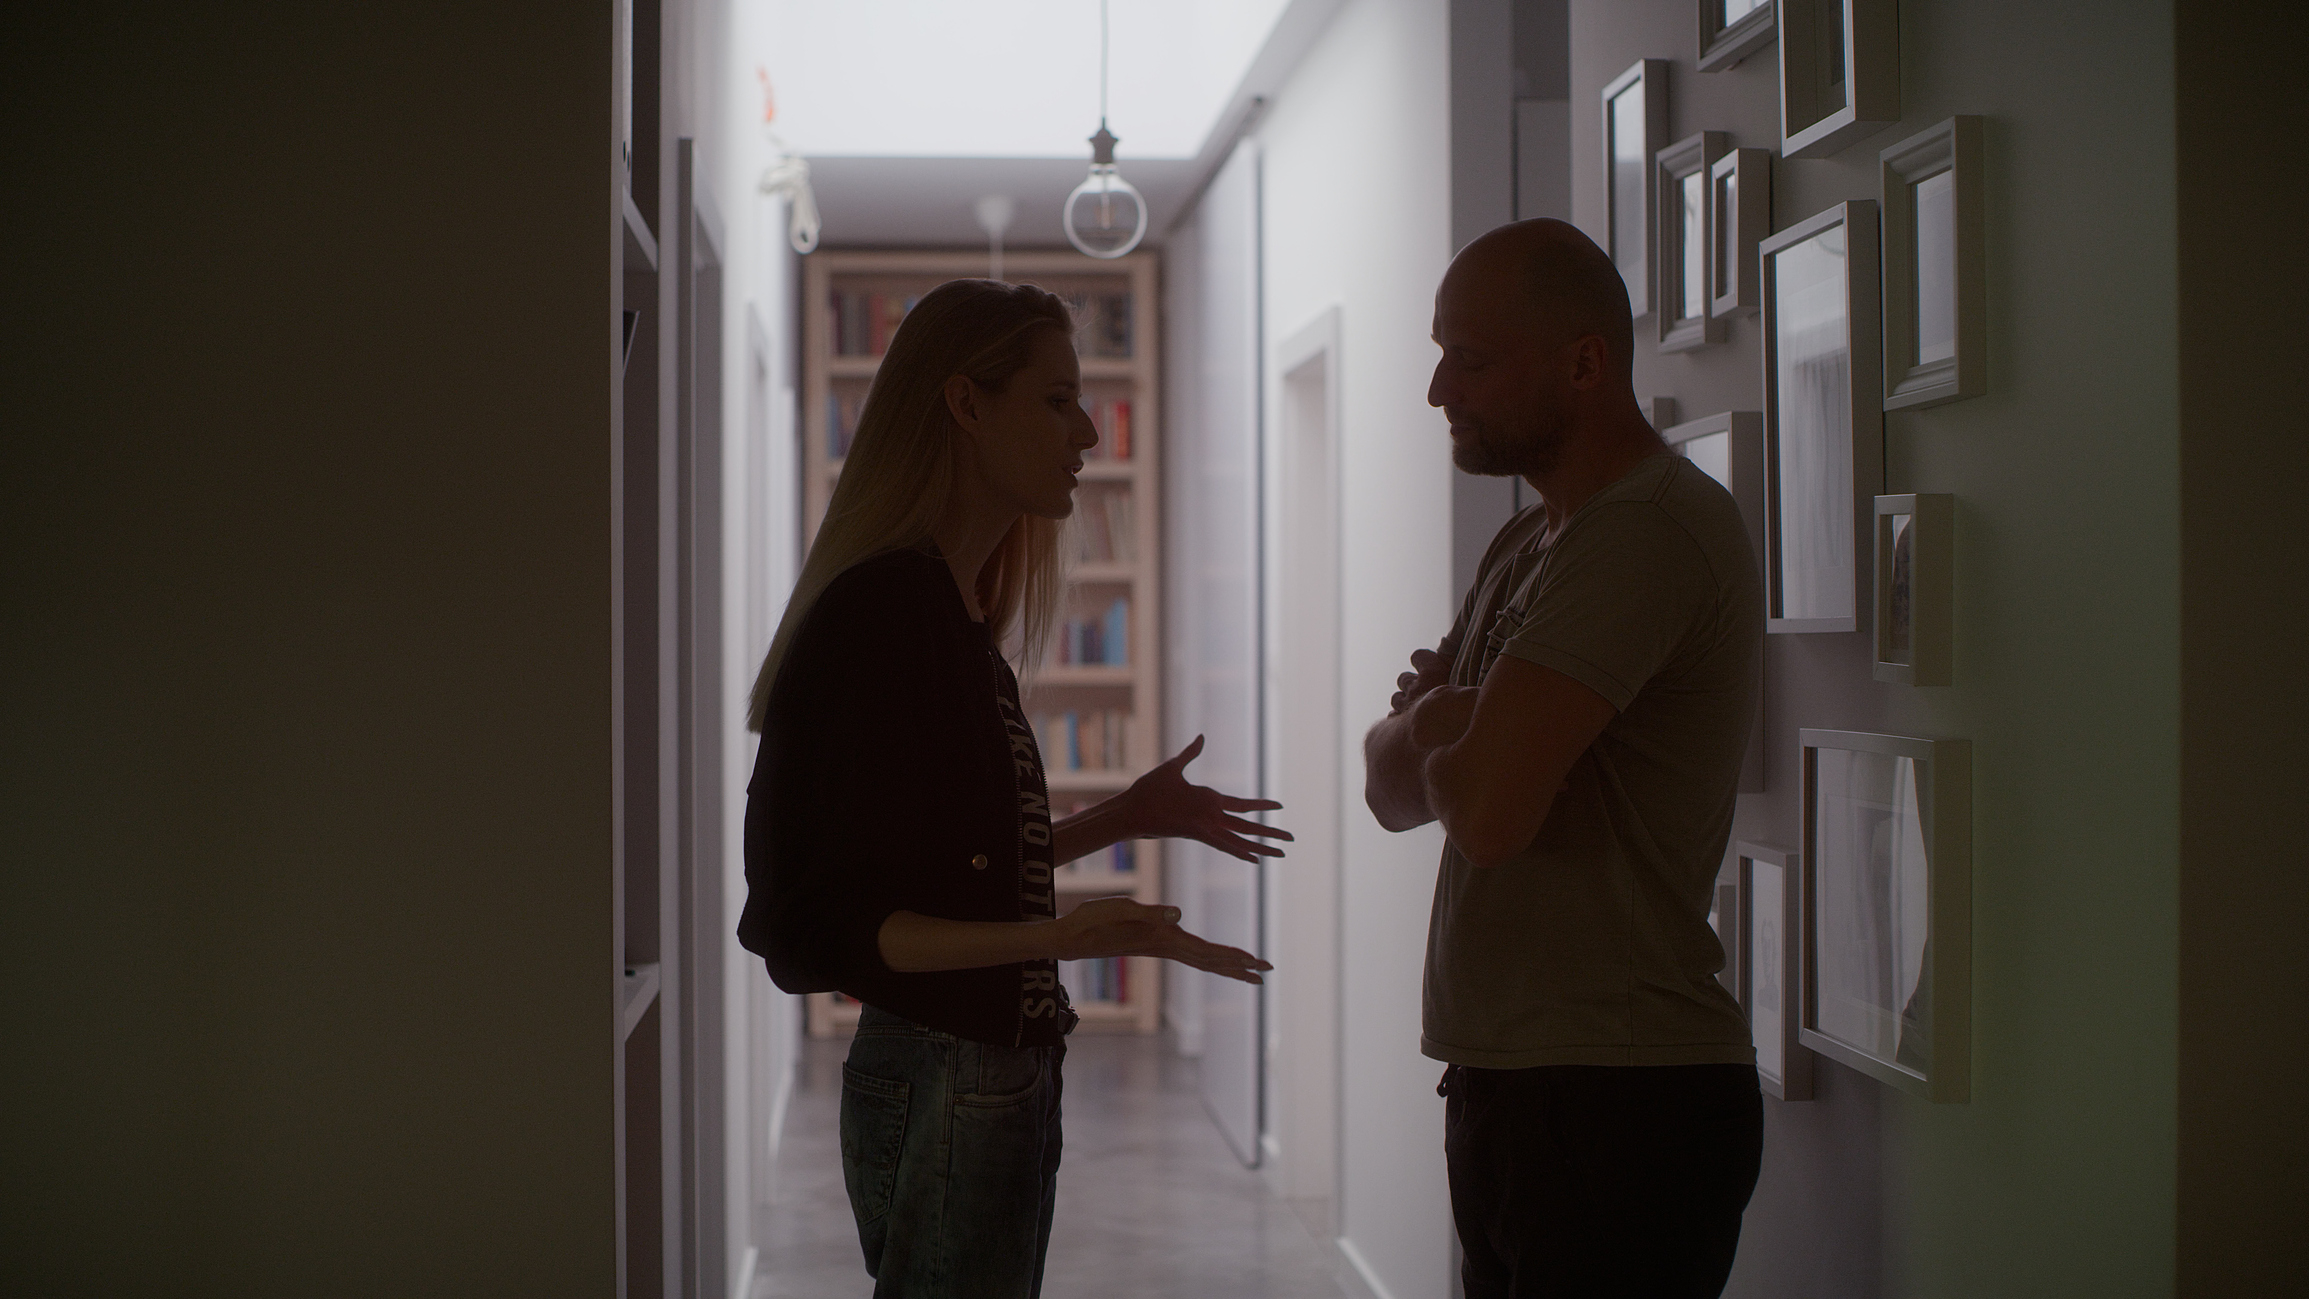 Two people engaged in a conversation in a dimly lit hallway with photo frames on the wall